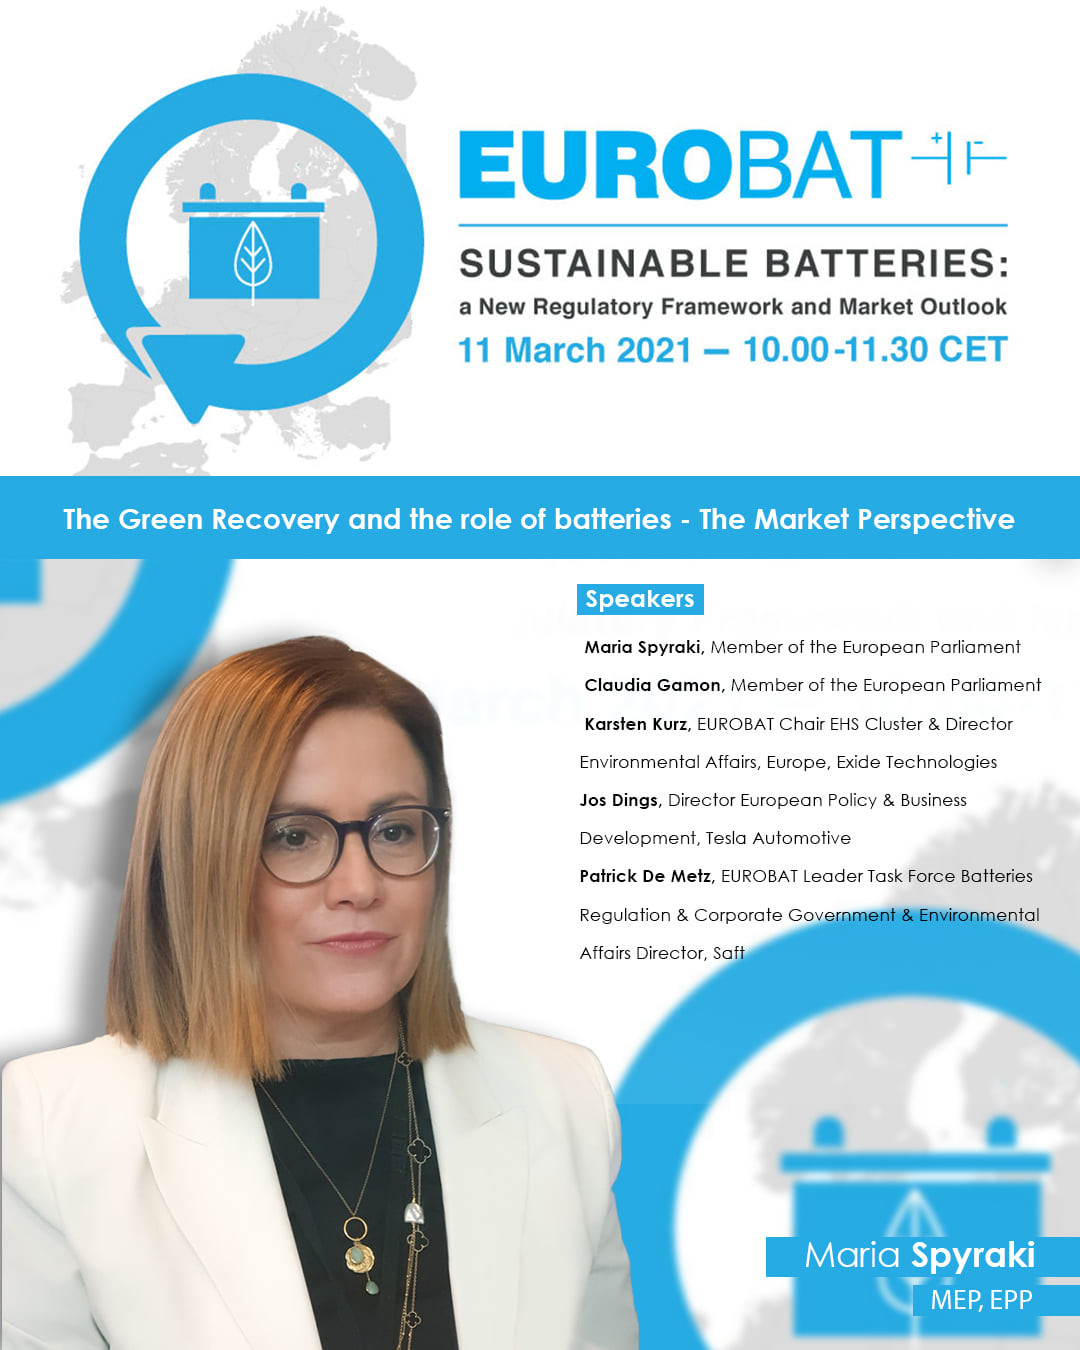  Eurobat - The Green Recovery and the role of batteries - the Market Perspective